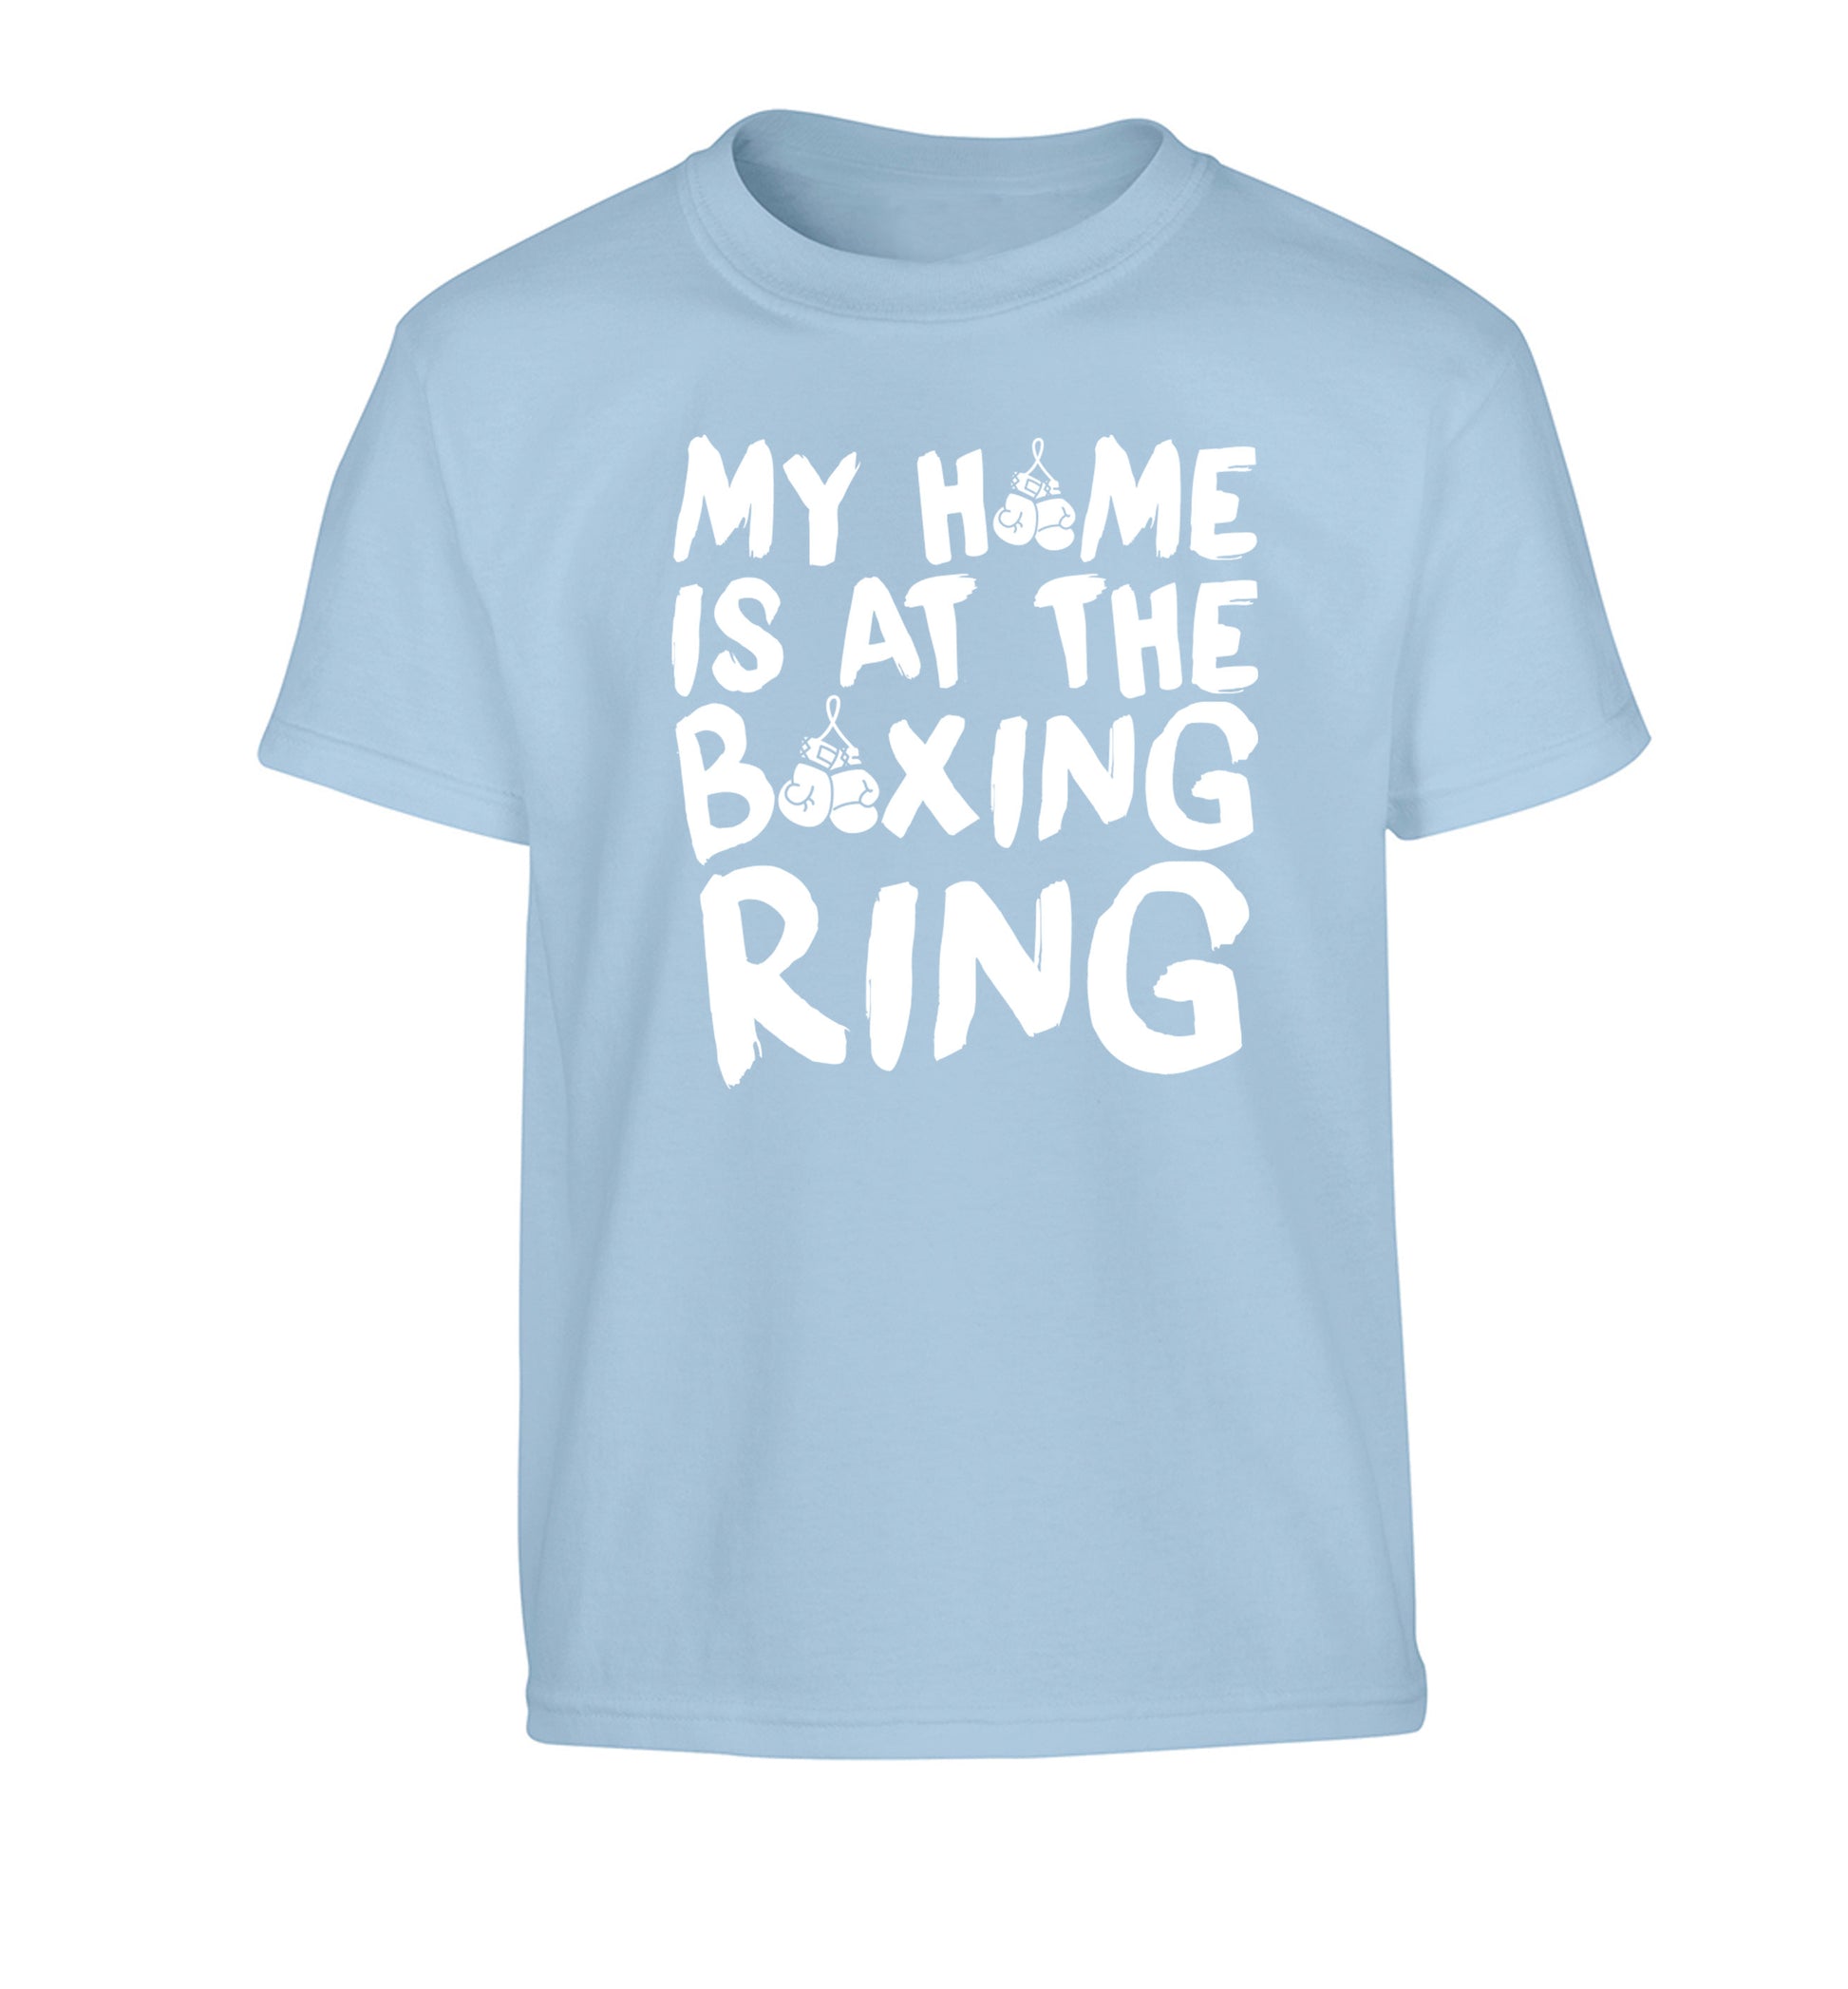 My home is at the boxing ring Children's light blue Tshirt 12-14 Years